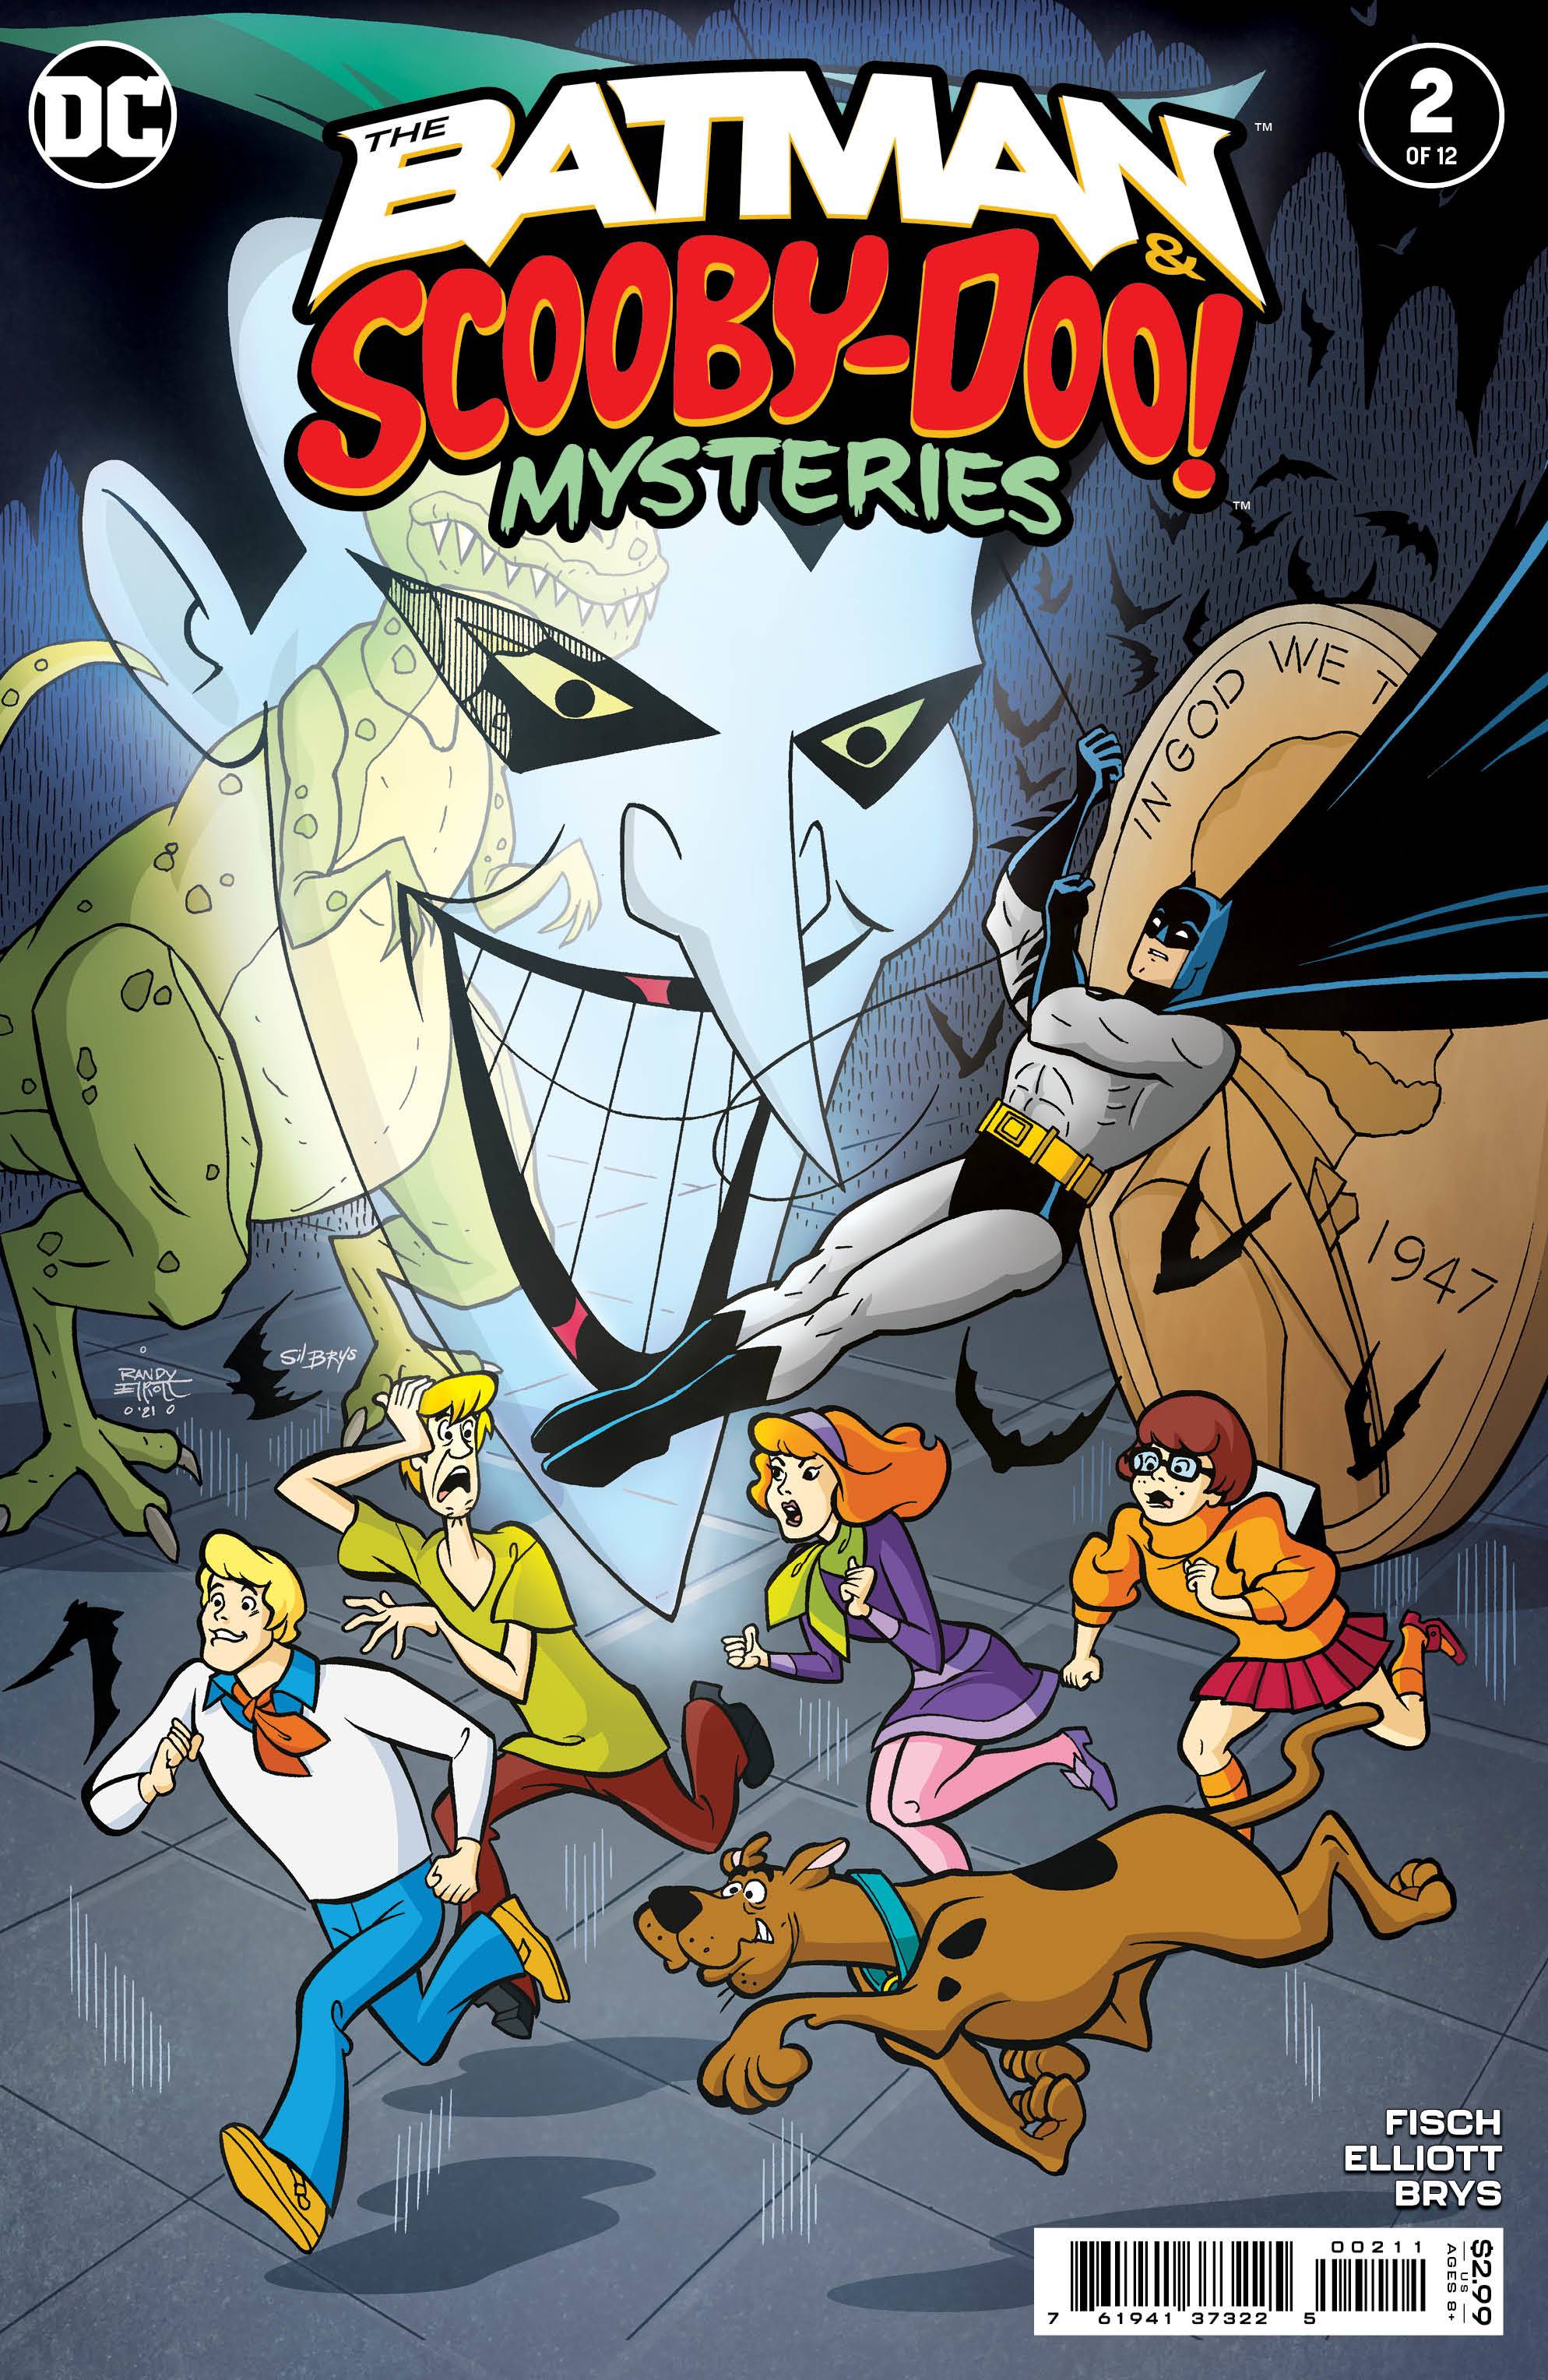 BATMAN & SCOOBY DOO MYSTERIES #2 | Game Master's Emporium (The New GME)